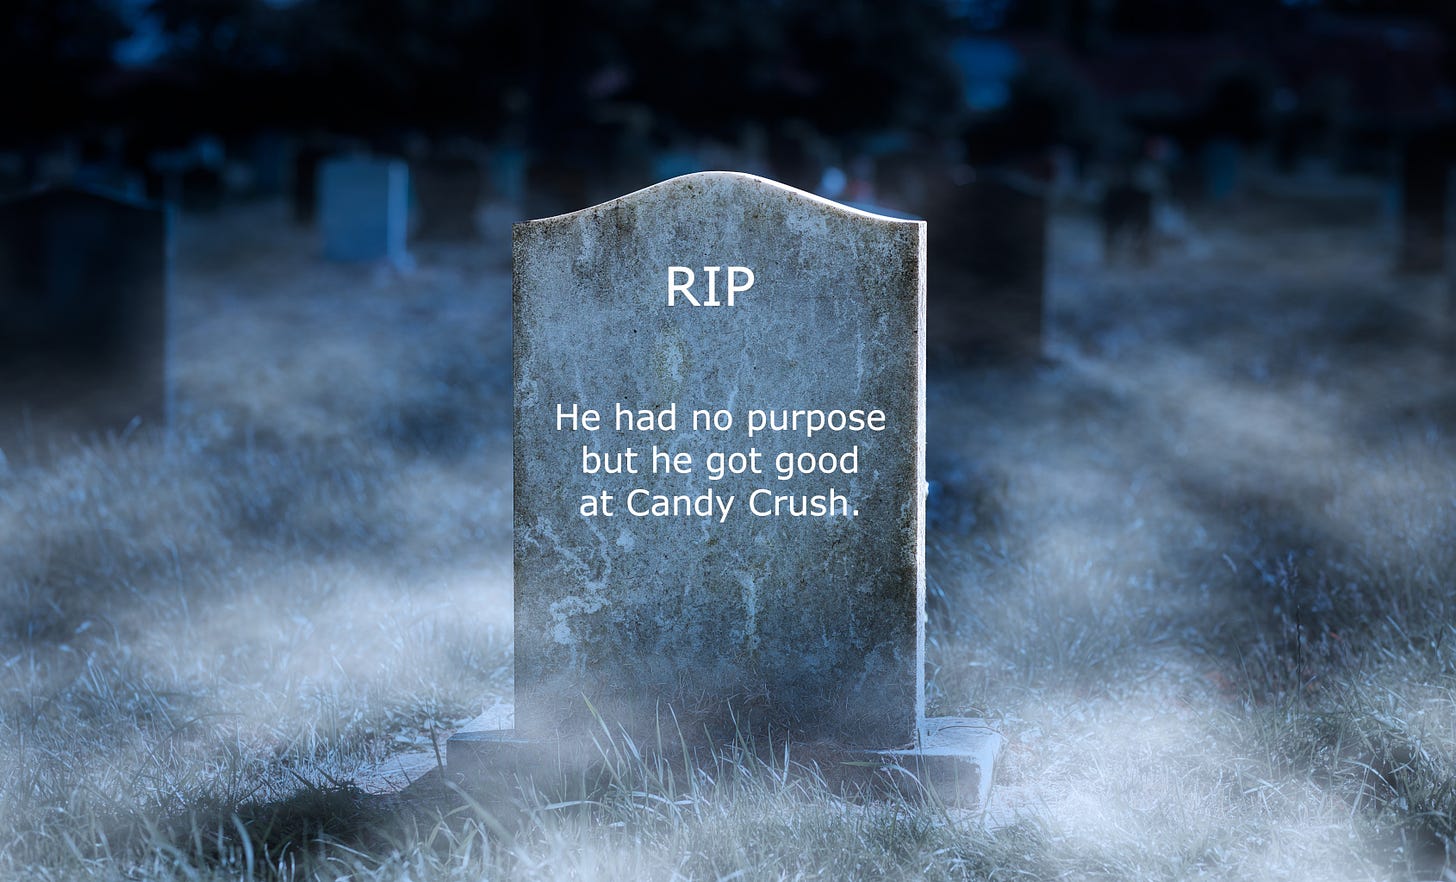 A tombstone with "He had no purpose but got good at Candy Crush" as epitaph.